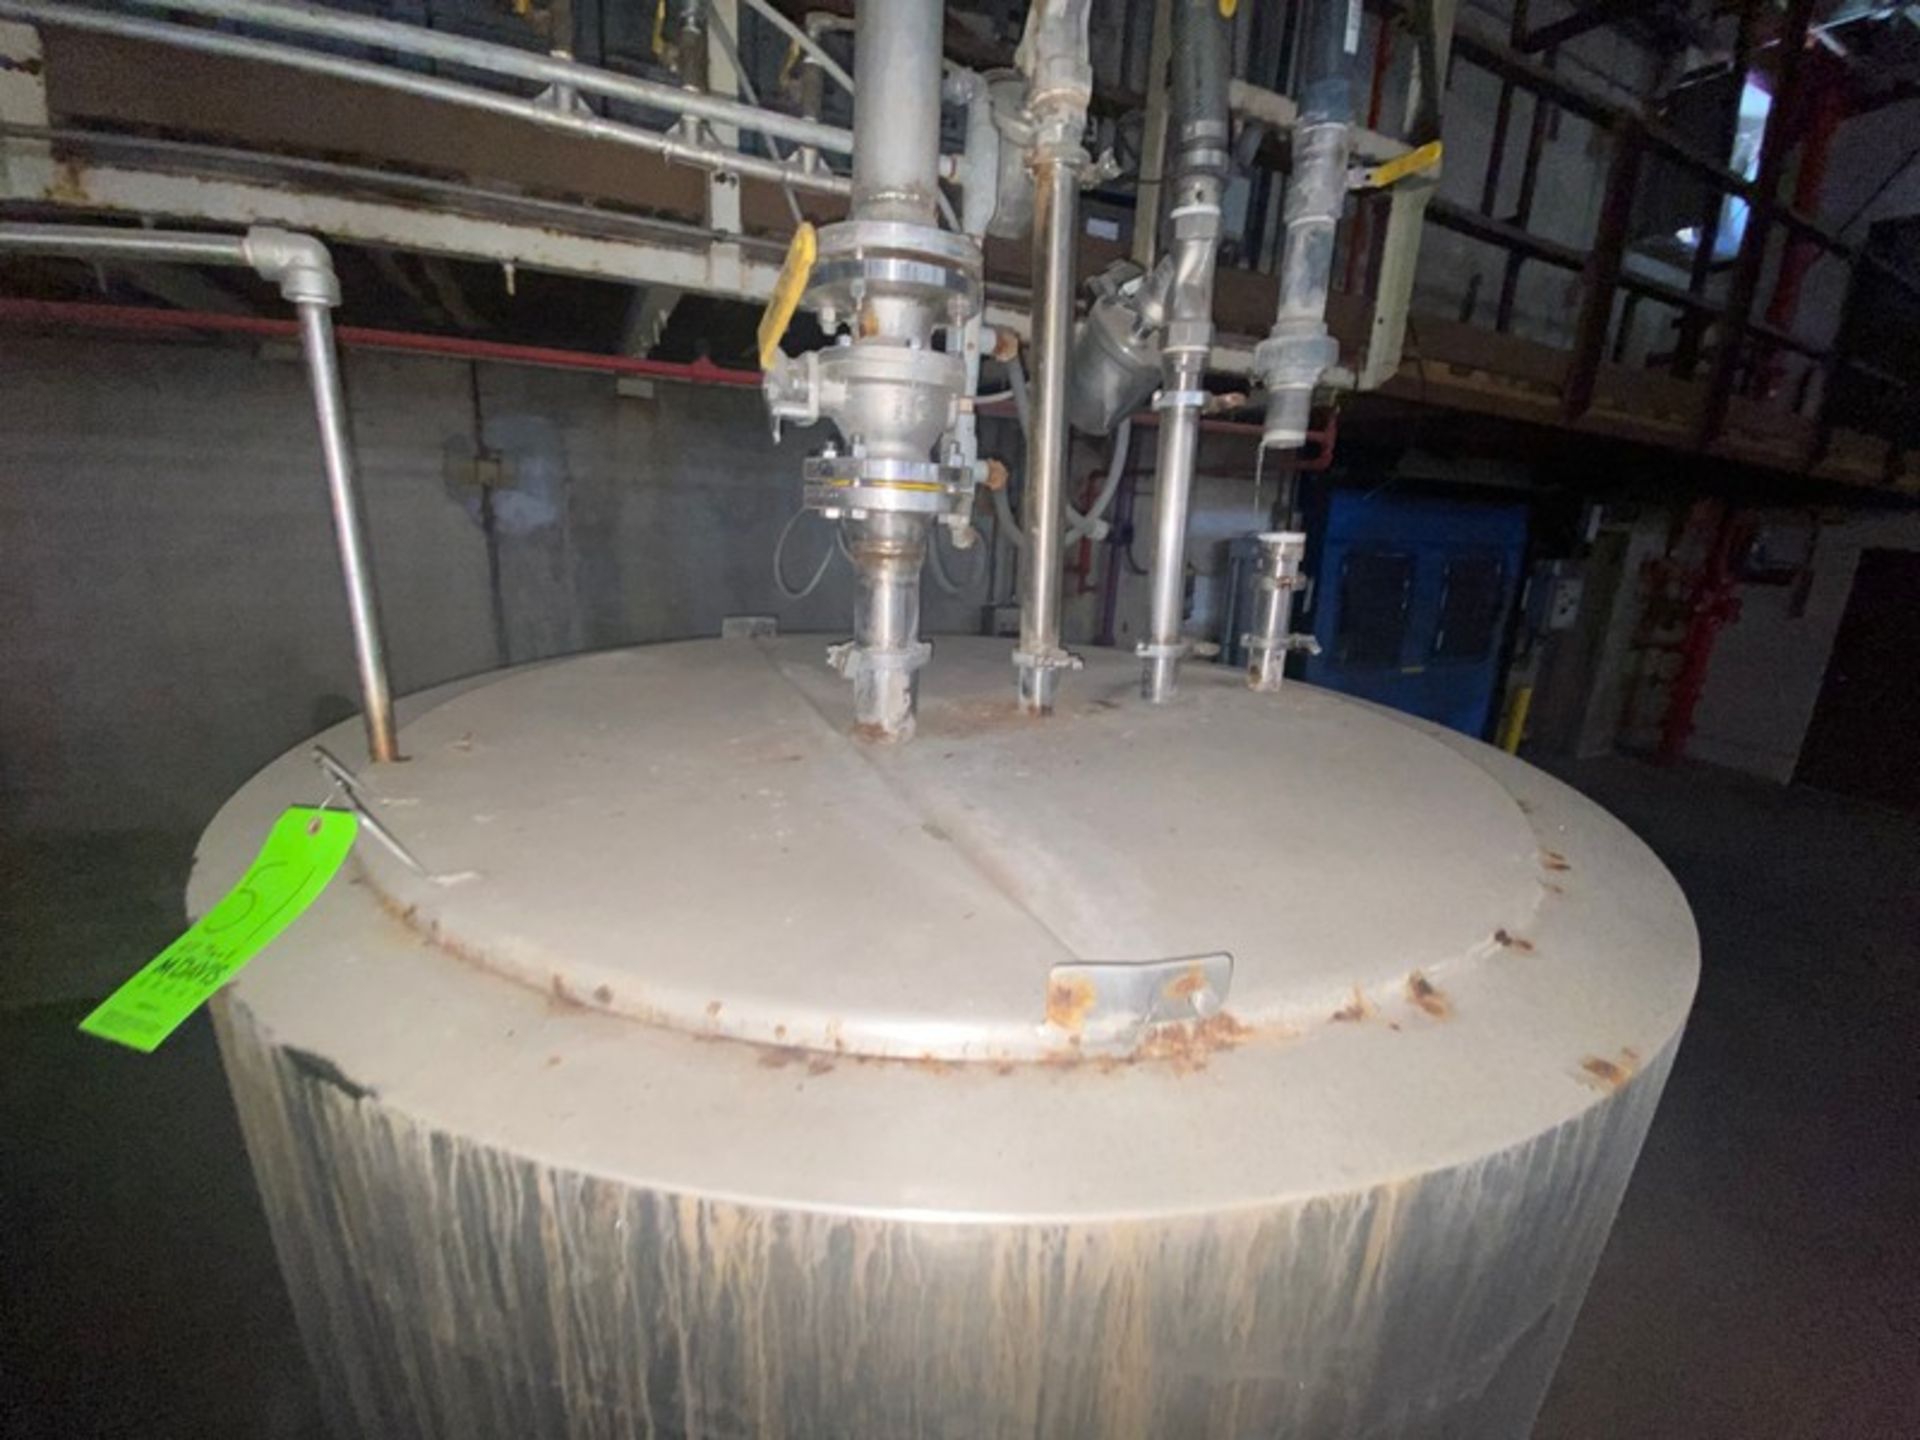 Damrow Bros. 400 Gal. S/S Vertical Insulated Tank, S/N 25609, with S/S Hinge Lid, Mounted on S/S - Image 7 of 16